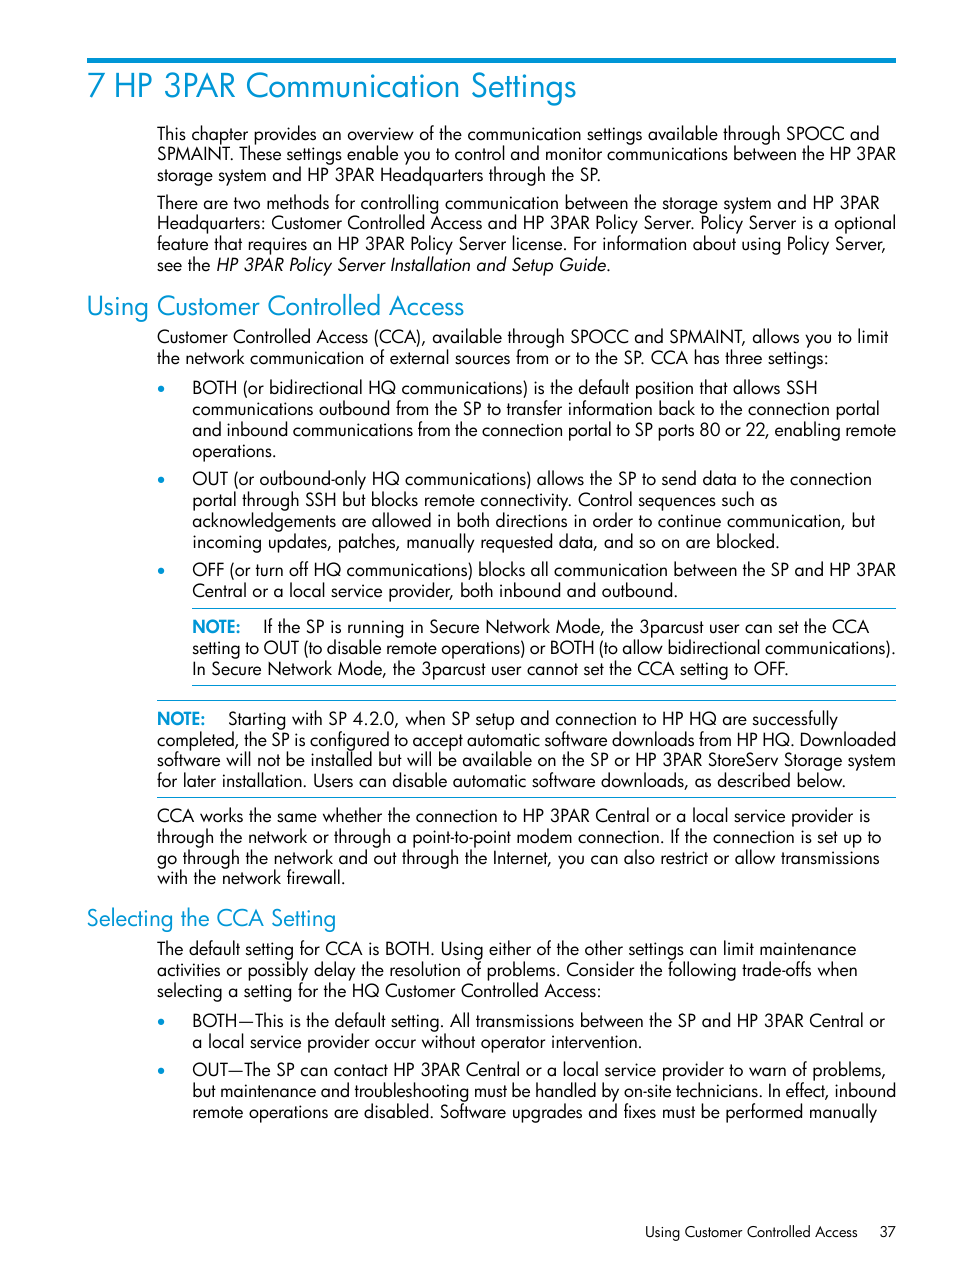 7 hp 3par communication settings, Using customer controlled access, Selecting the cca setting | HP 3PAR Service Processors User Manual | Page 37 / 51